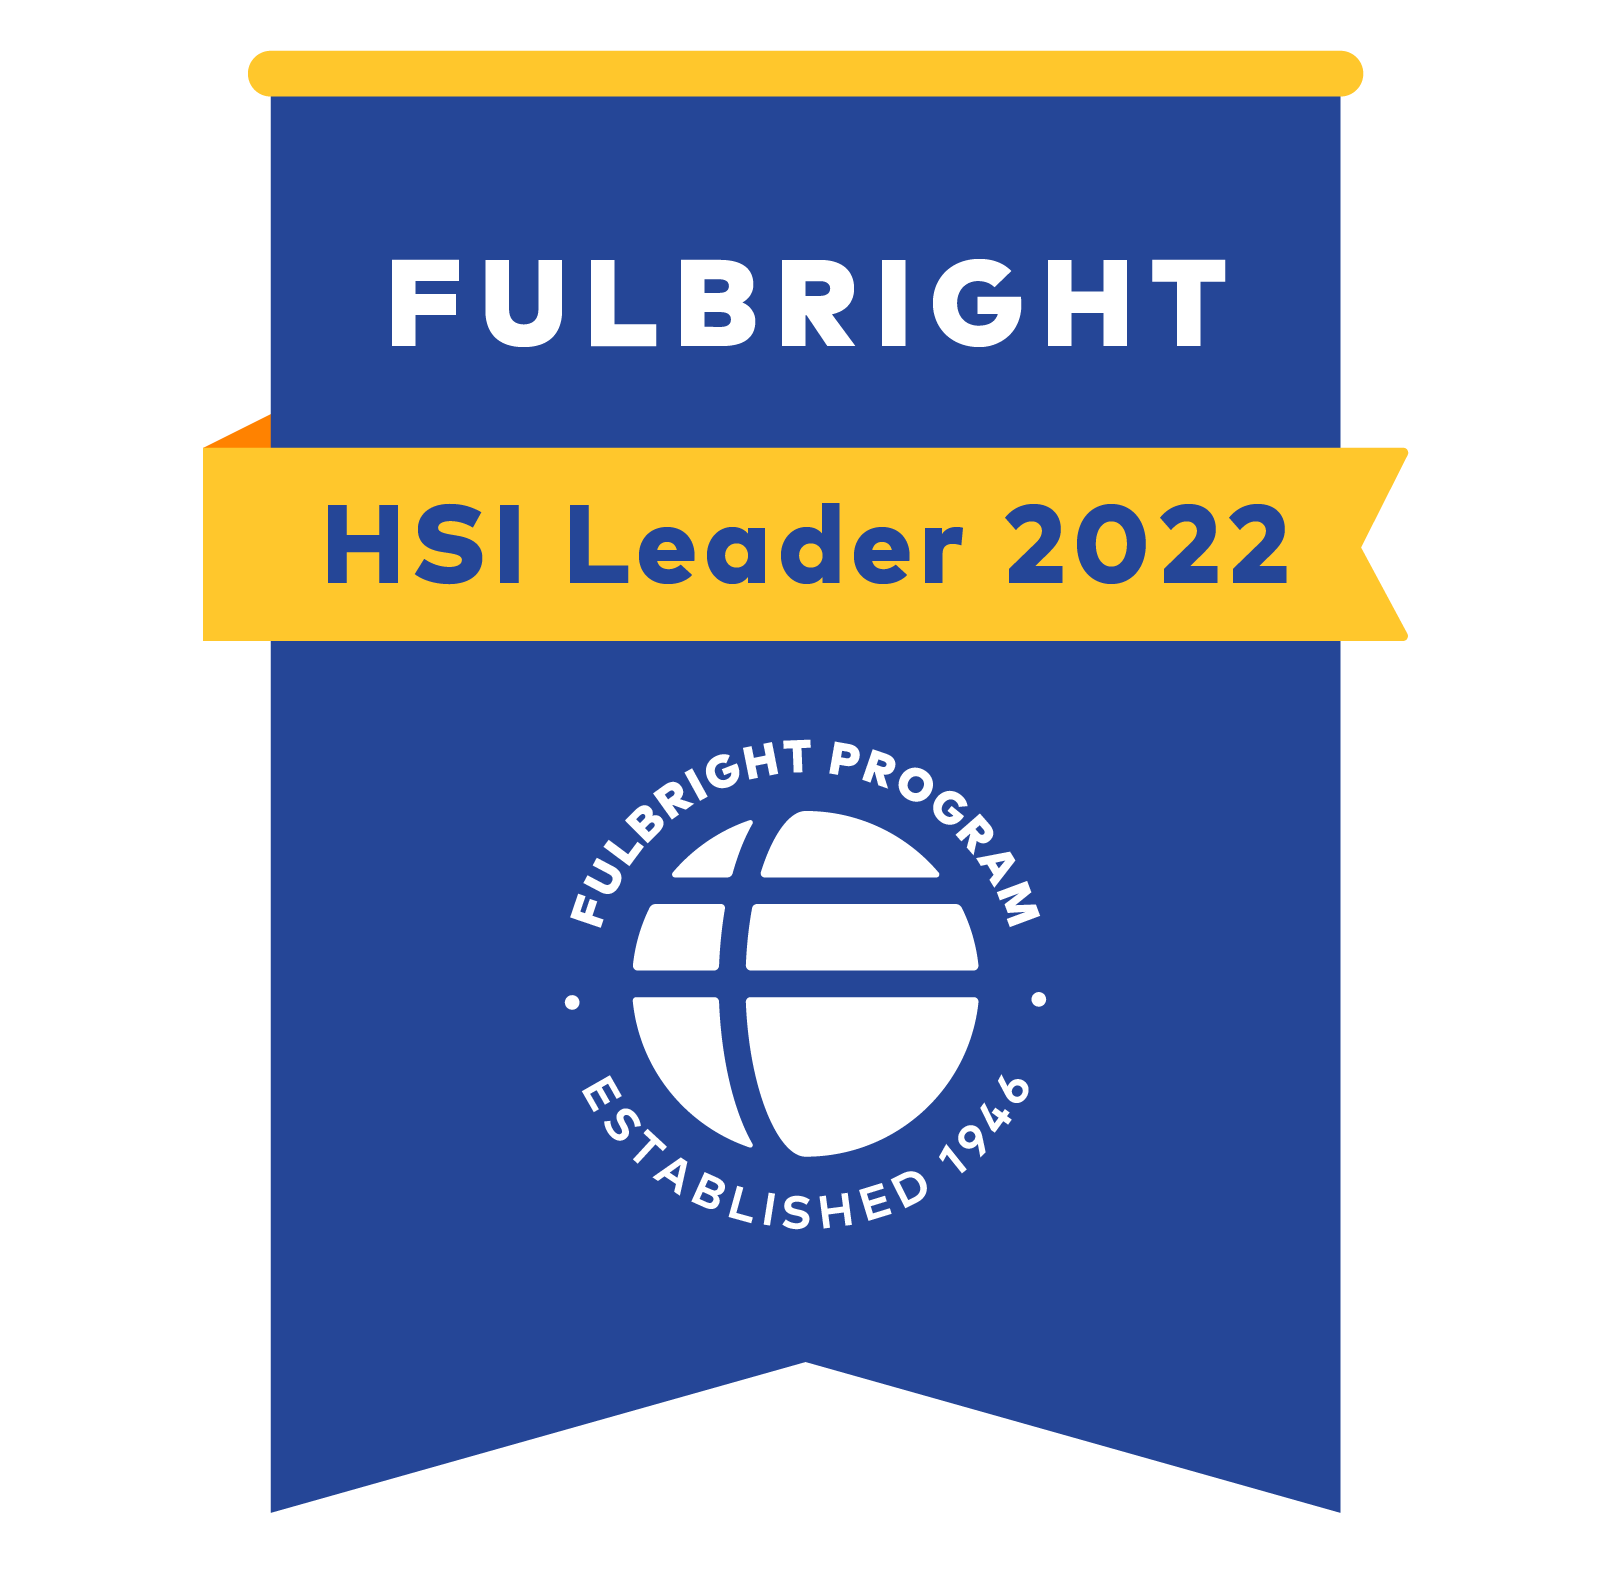 fulbright-badge_hsi_badge.png